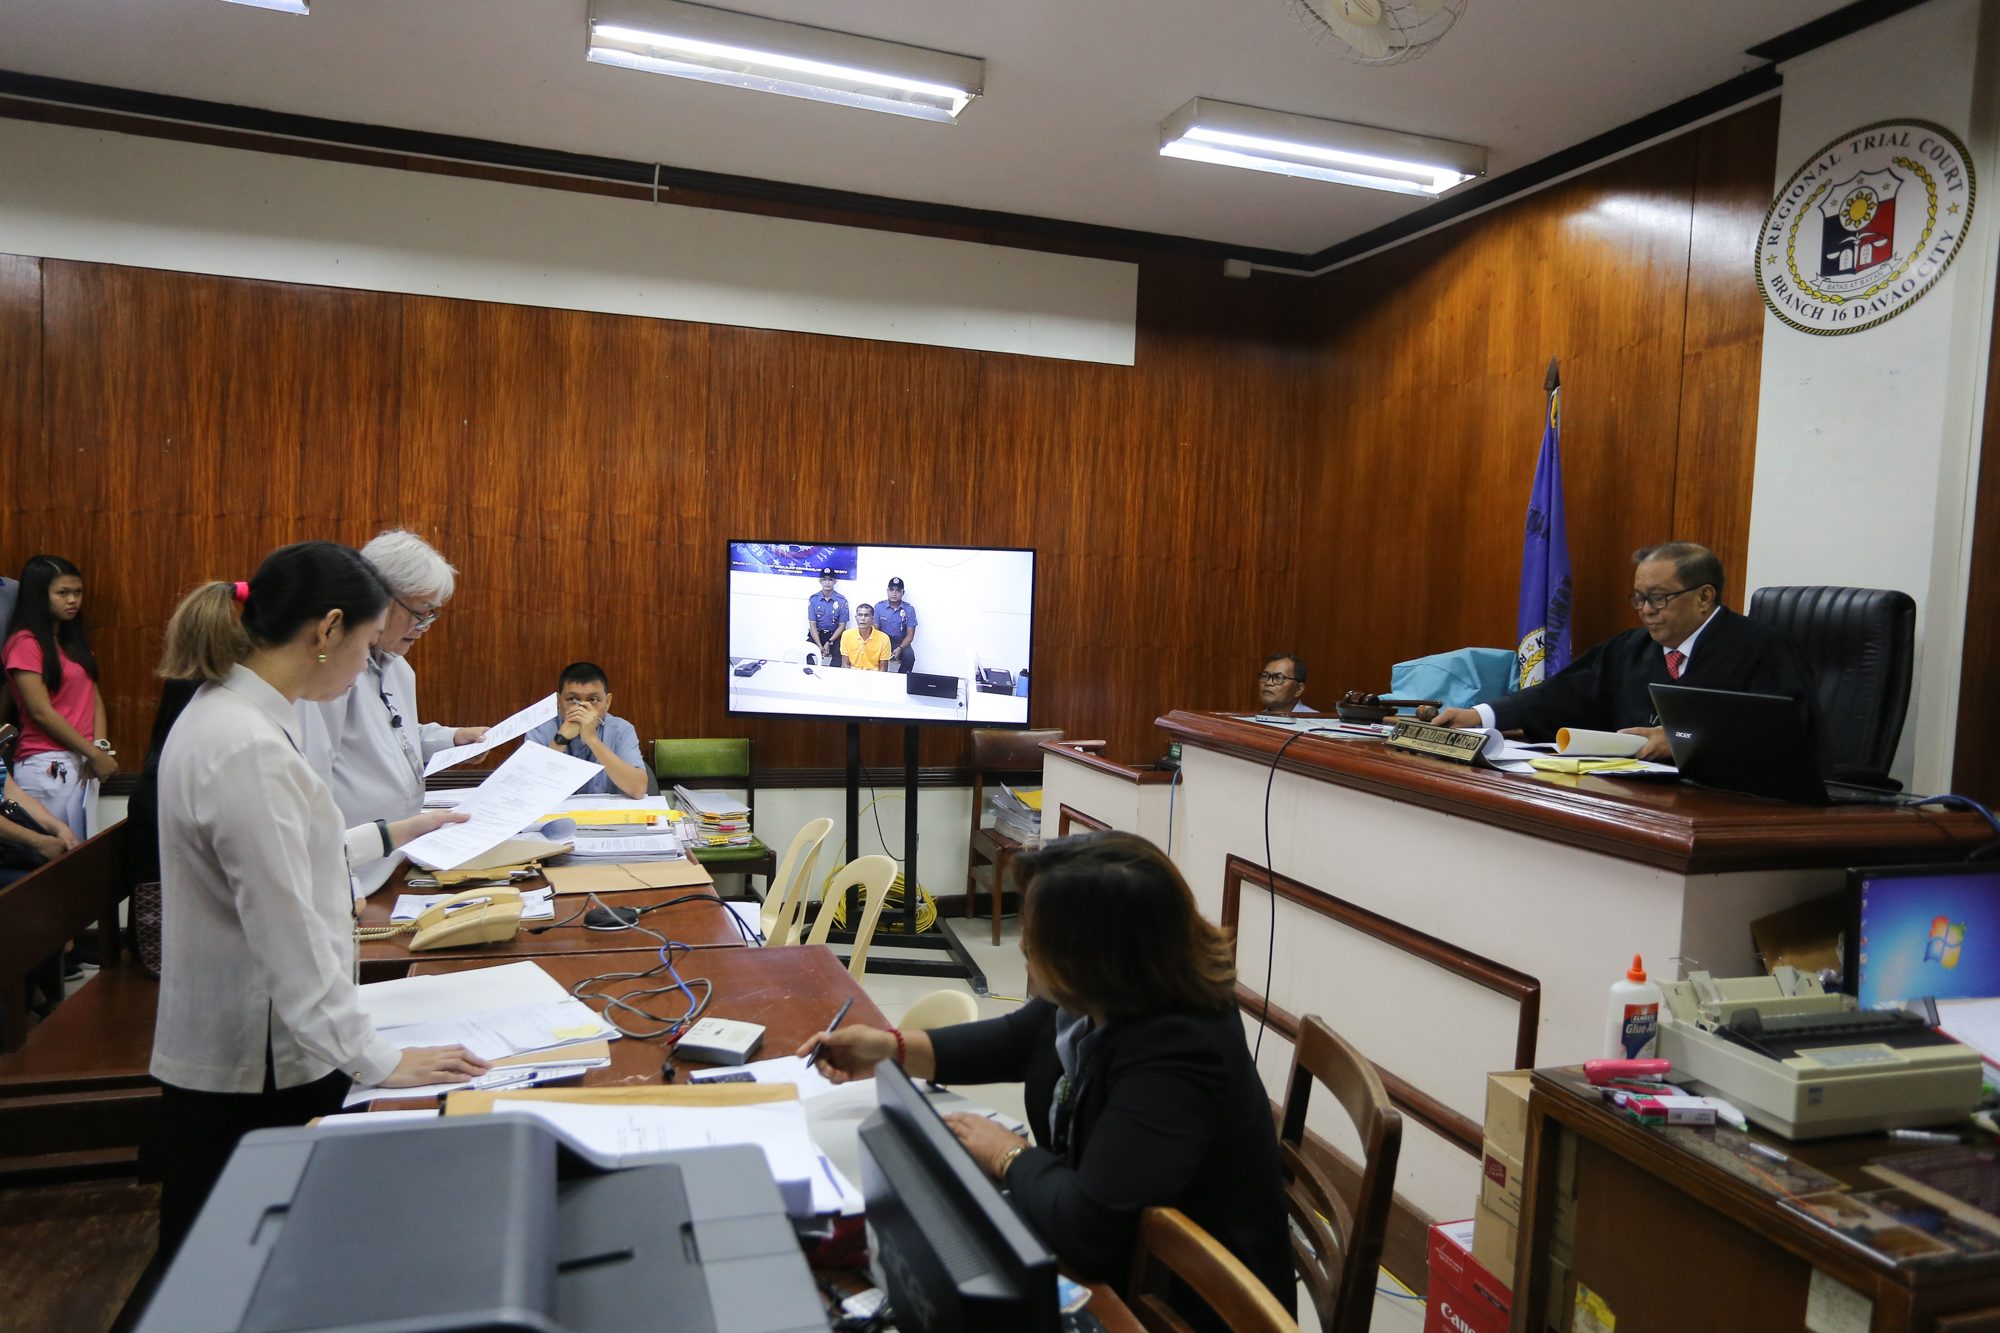 Davao City court holds first ever teleconference hearings in PH